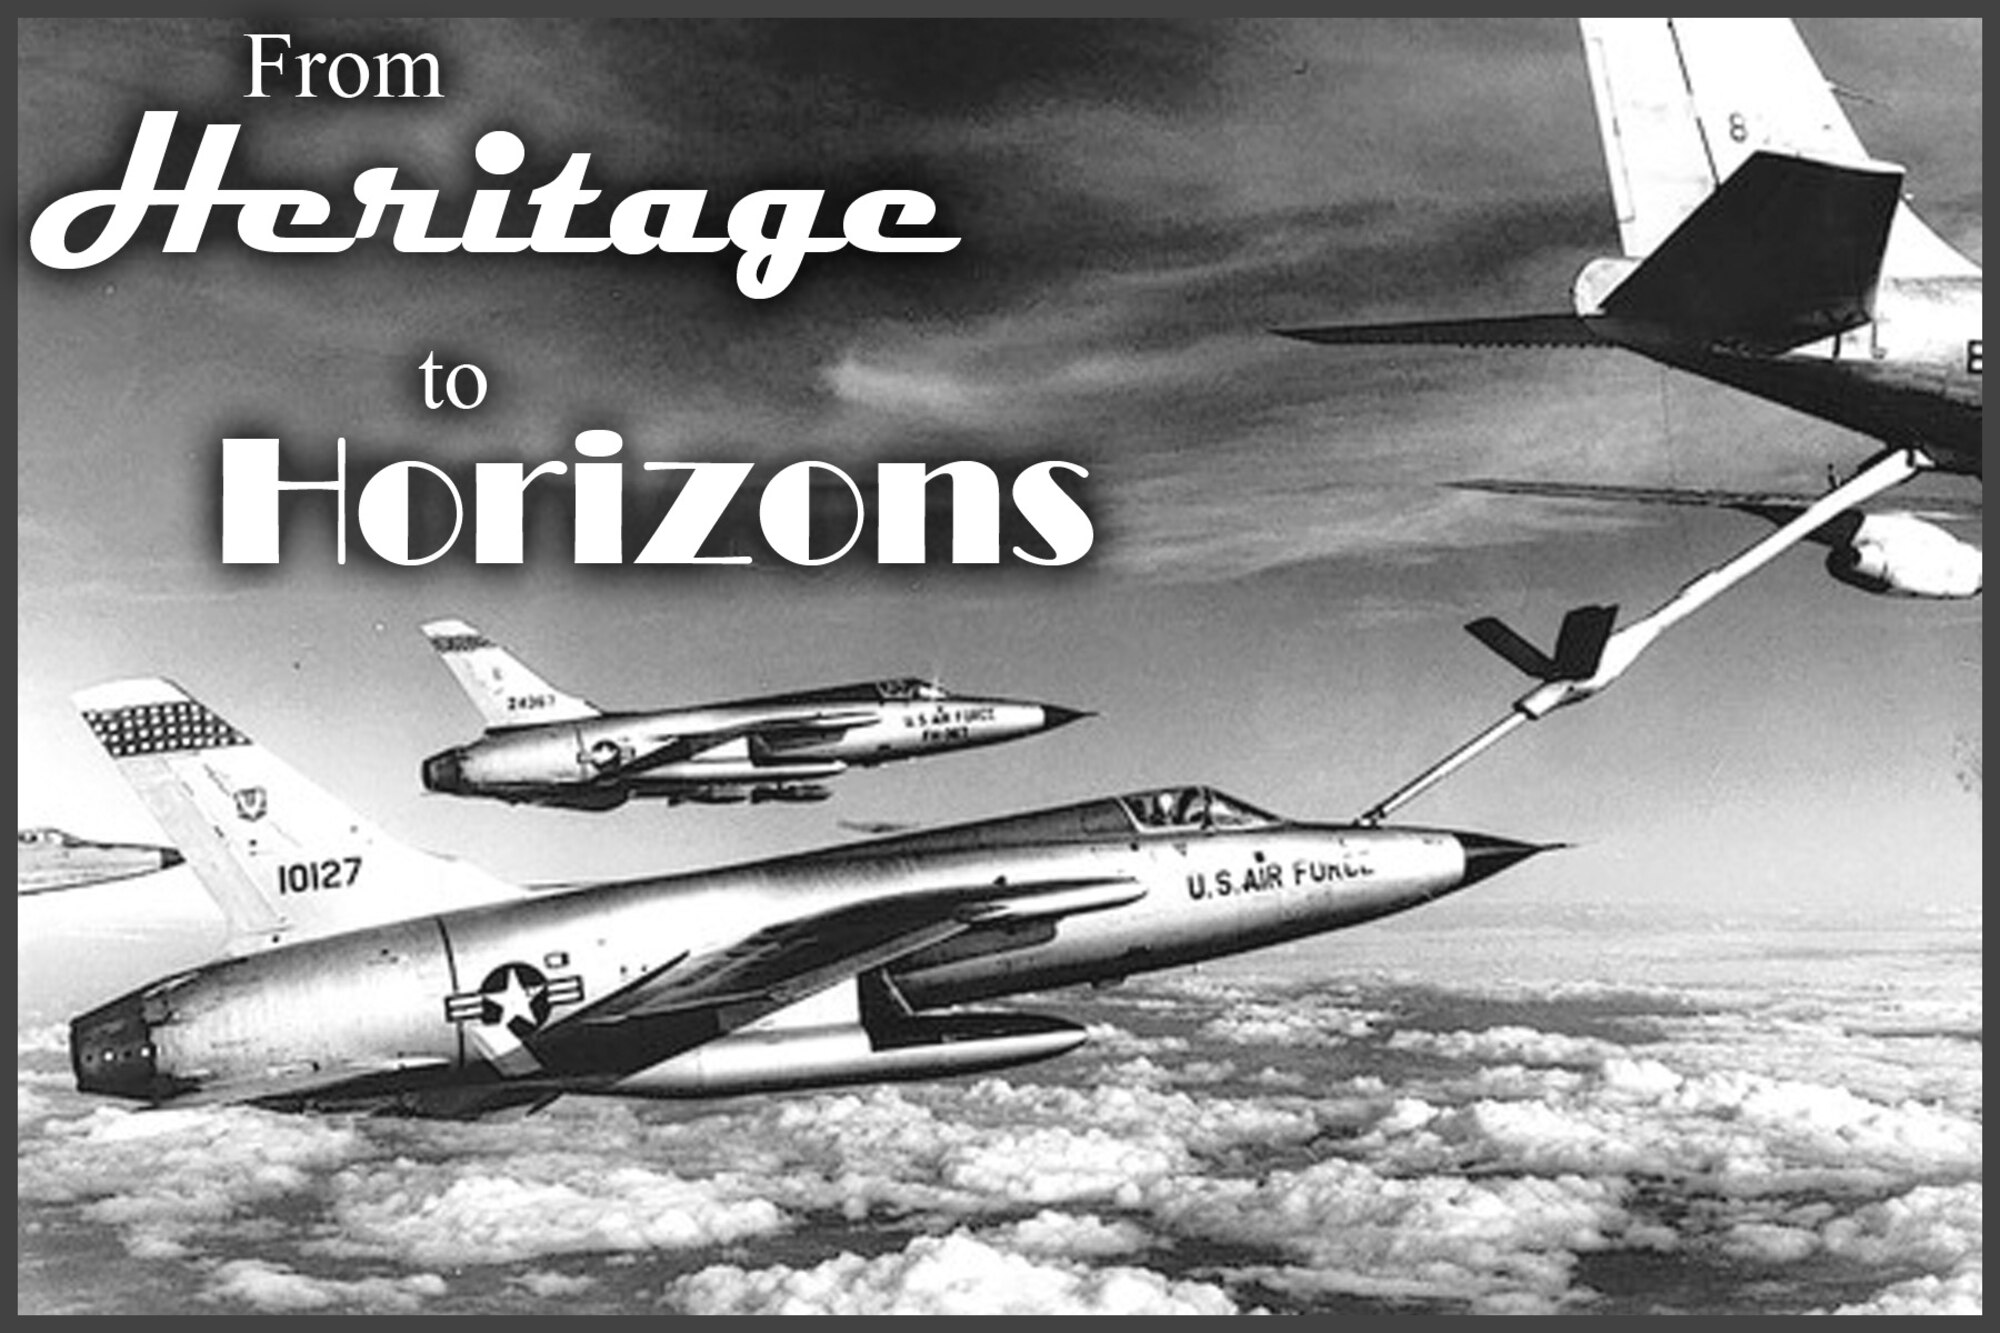 "From Heritage to Horizons" is a regular column provided by the 92nd Air Refueling Wing Historian. (U.S. Air Force photo graphic by Senior Airman Taylor Curry)